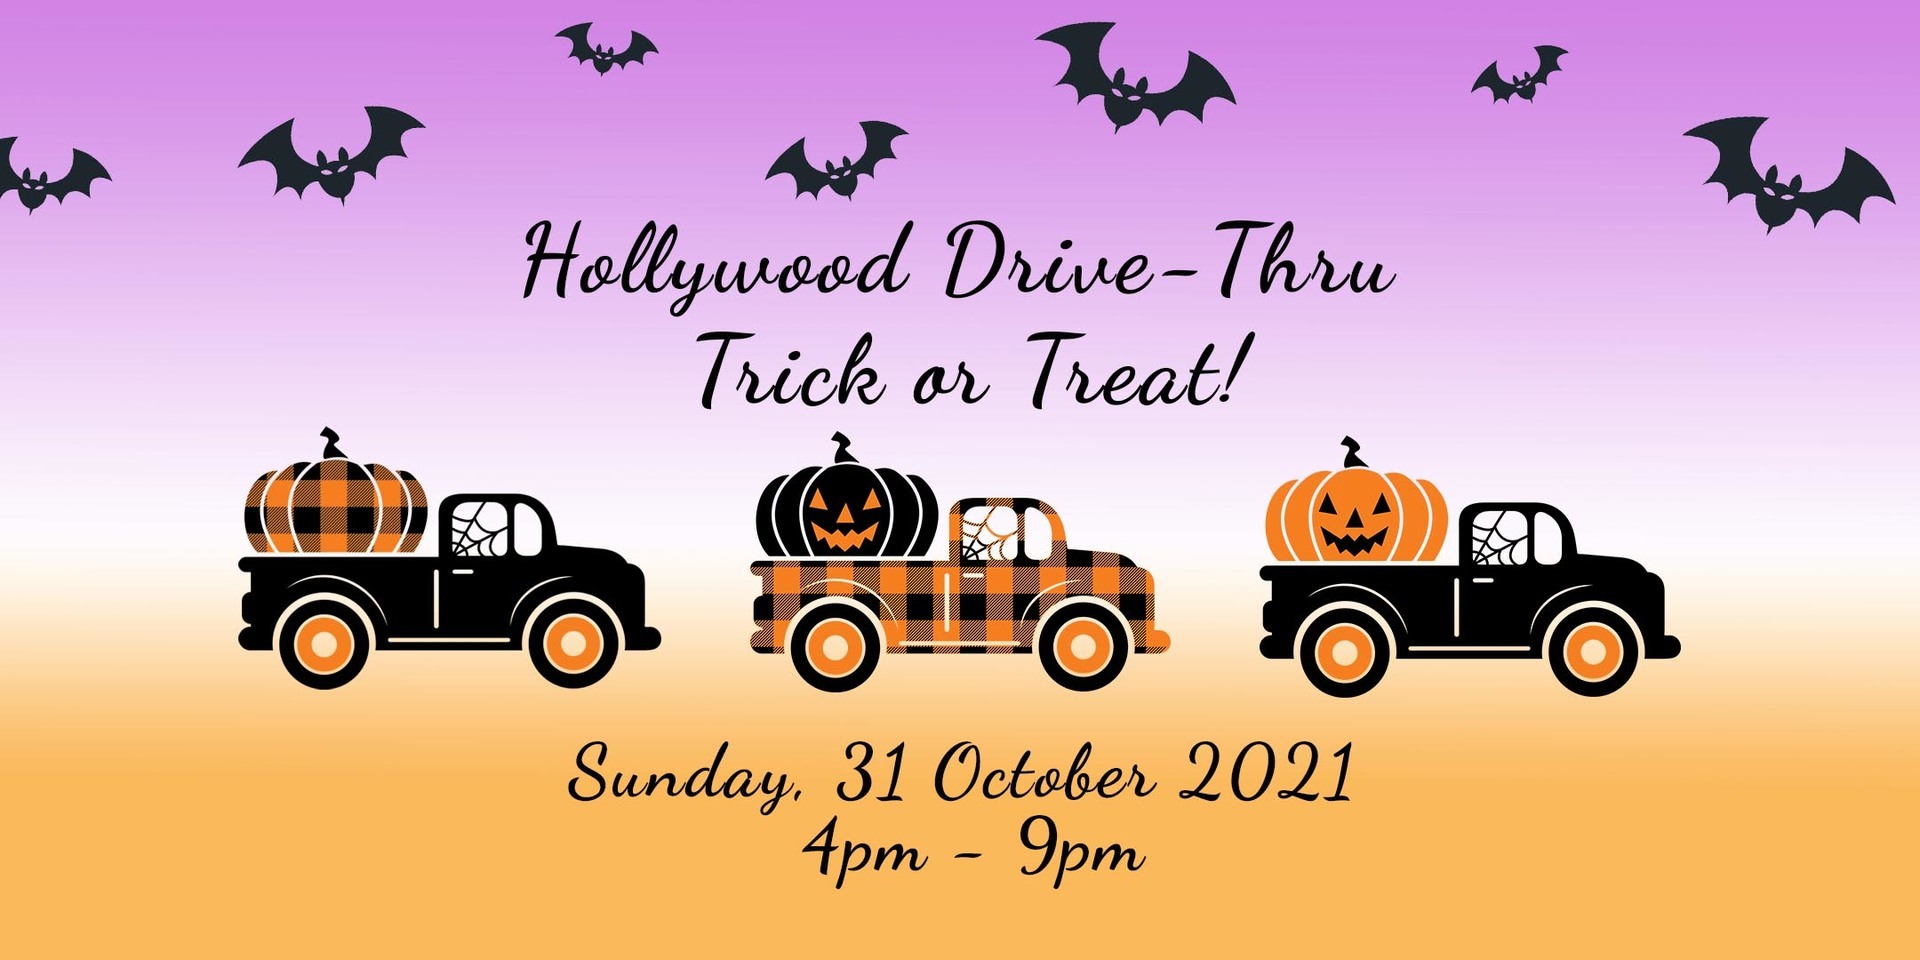 Hollywood Drive-Thru Trick or Treat, Los Angeles, California, United States